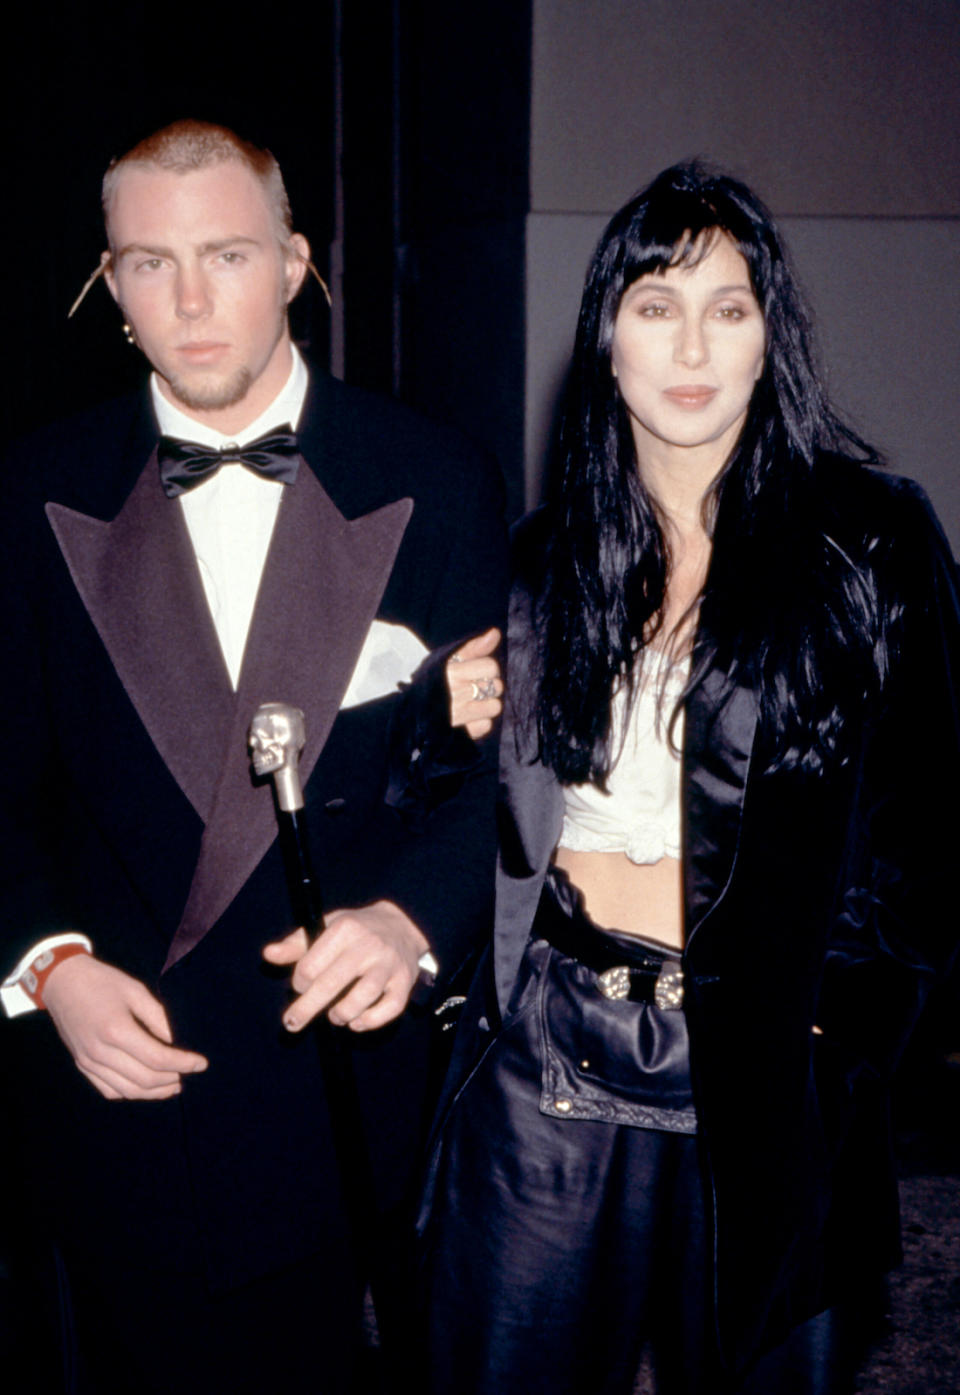 CENTURY CITY, CA - DECEMBER 7:  Elijah Blue Allman and his mother American singer and actress Cher attend the 5th Annual Fire and Ice Ball to Benefit Revlon UCLA Women Cancer Center on December 7, 1994 at the 20th Century Fox Studios in Century City, California.  (Photo by Ron Davis/Getty Images)